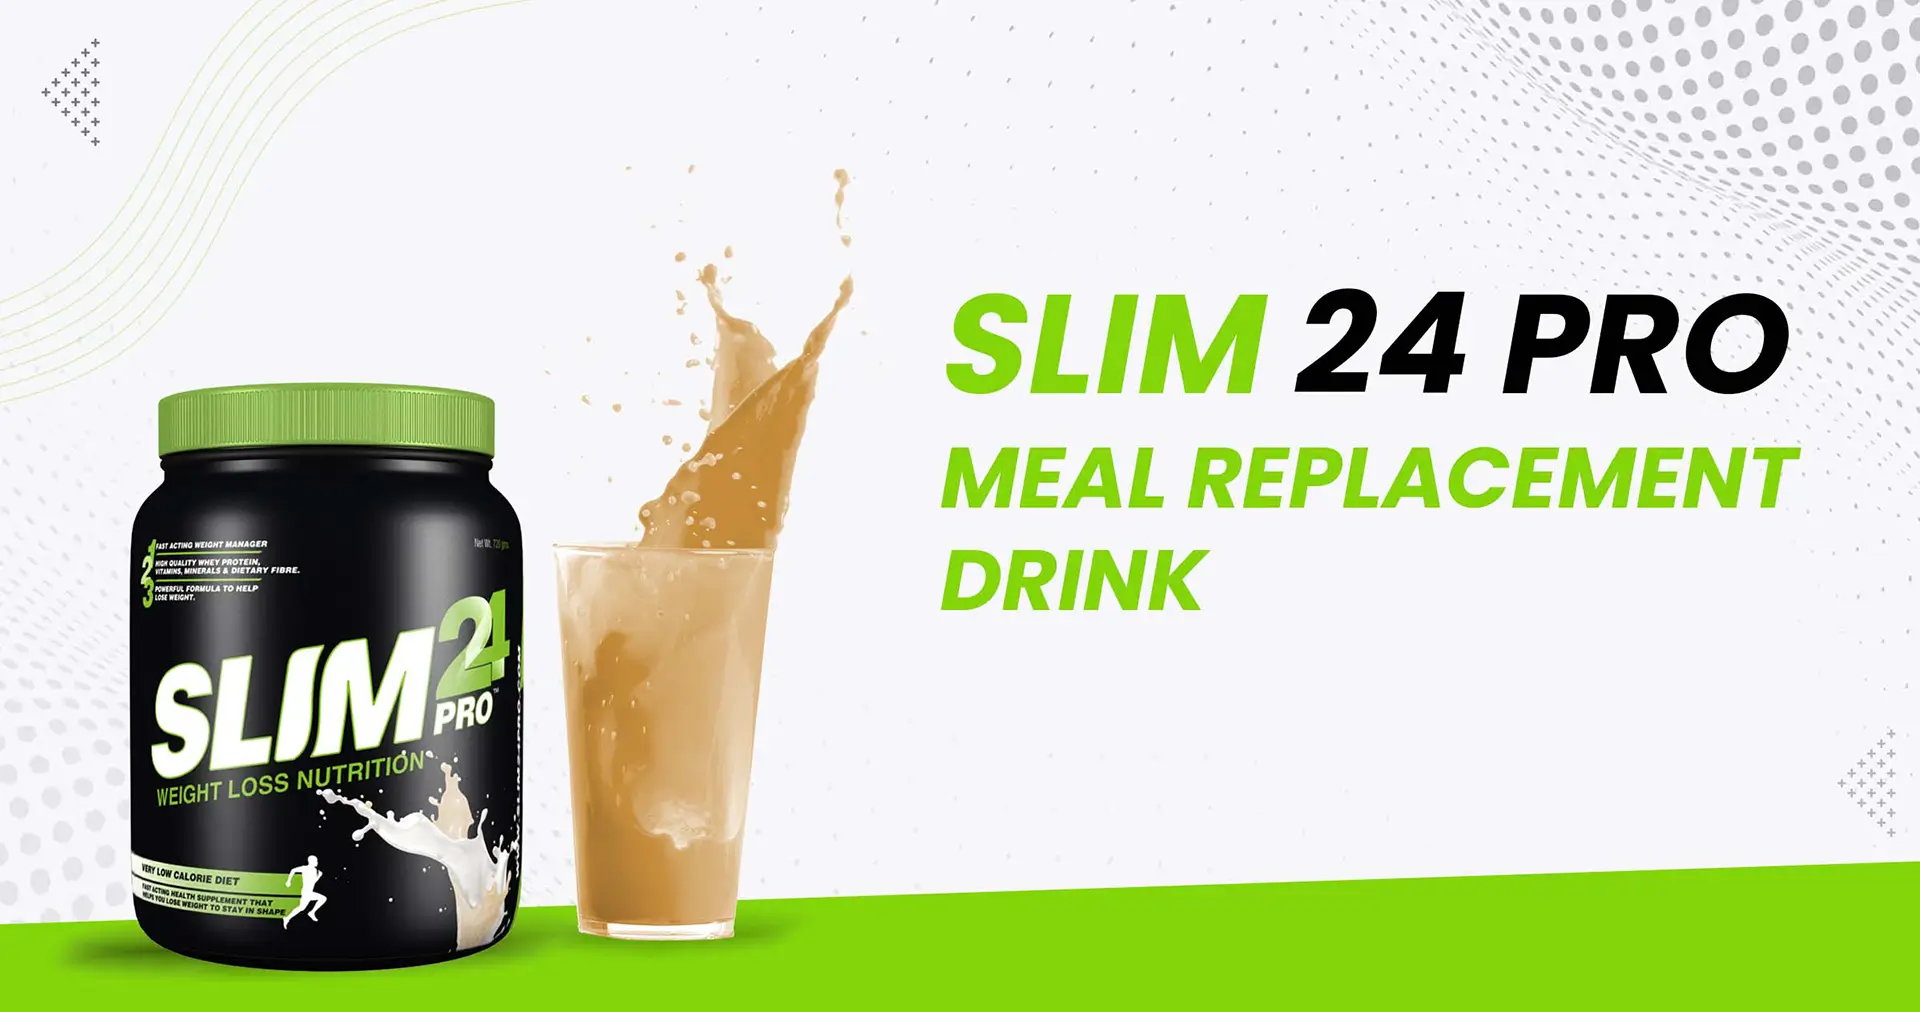 slim24pro - Meal Replacement Drink